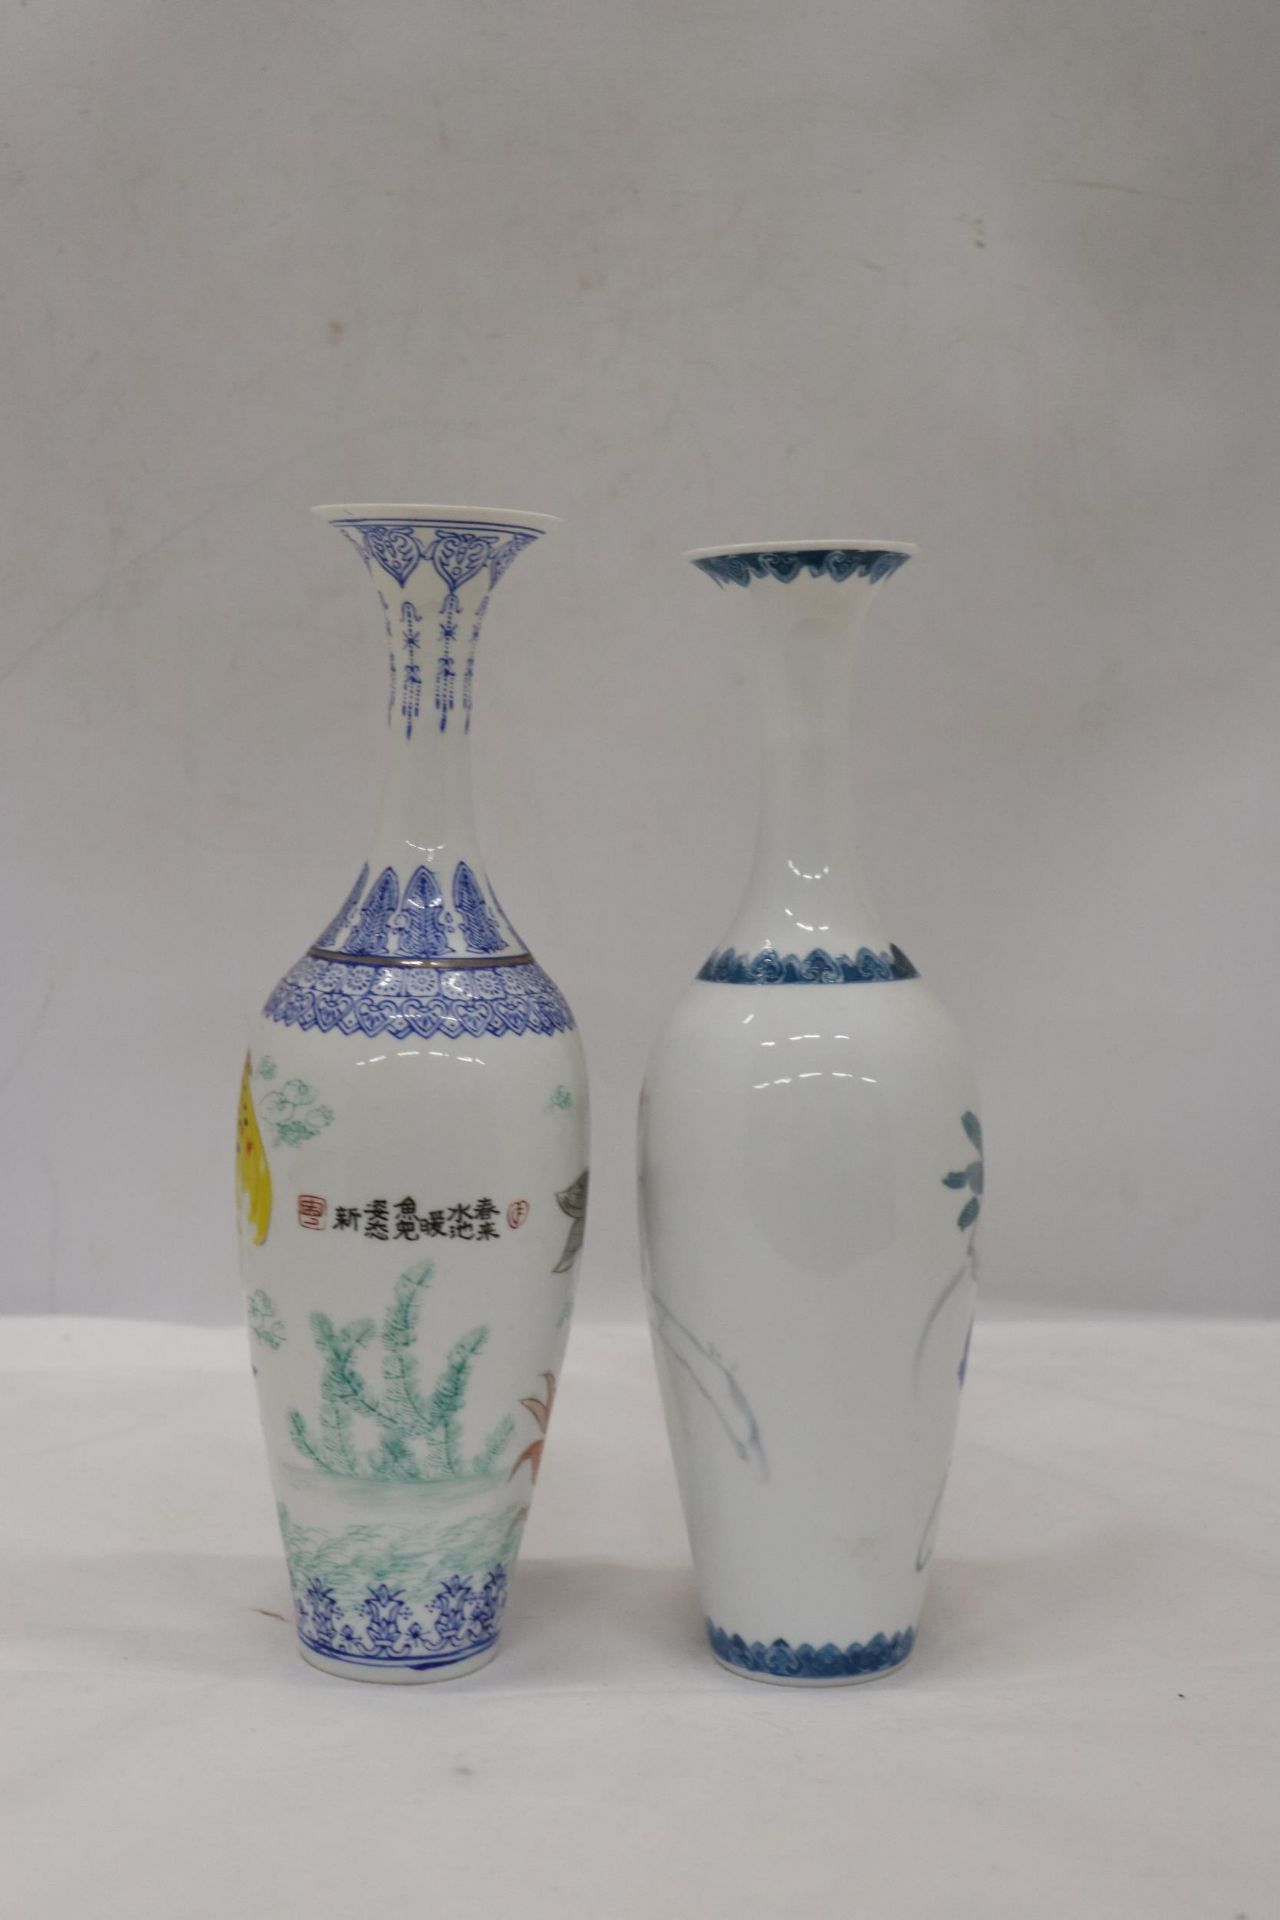 TWO VINTAGE CHINESE EGGSHELL HANDPAINTED VASES - KOI FISH AND FLORAL - Image 3 of 5